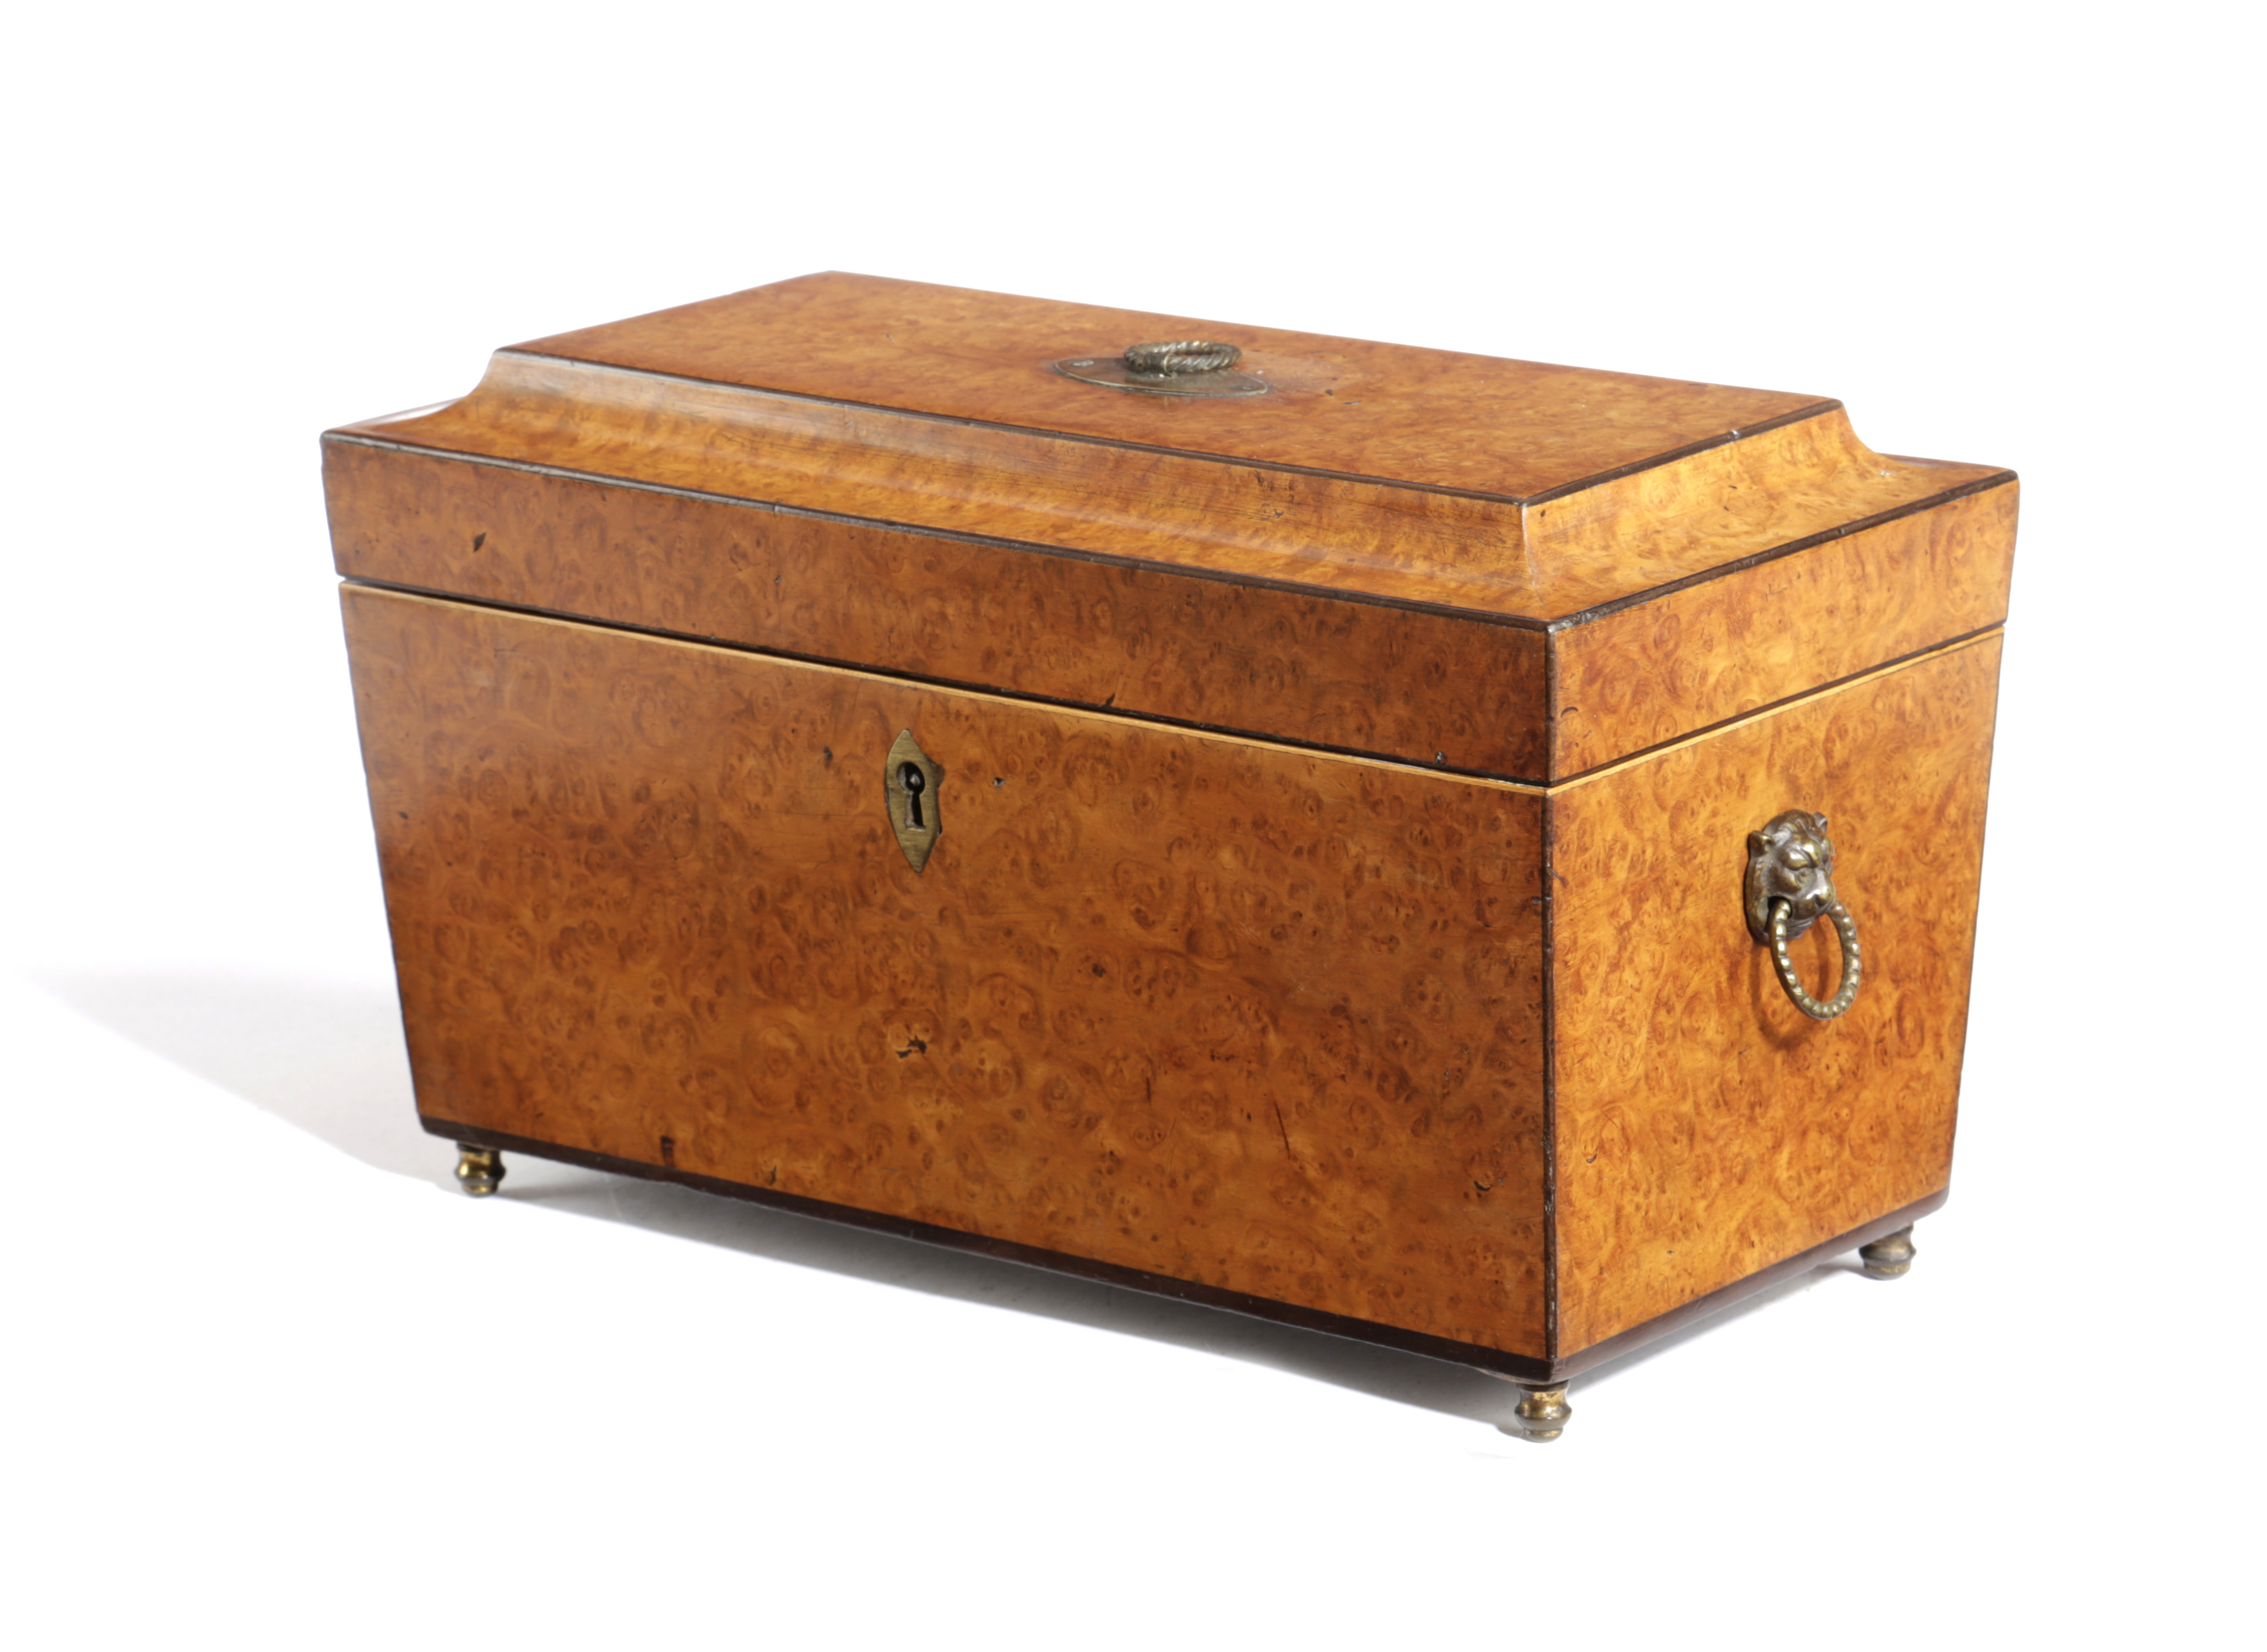 `A GEORGE IV AMBOYNA TEA CHEST EARLY 19TH CENTURY of sarcophagus form, with a pair of canisters with